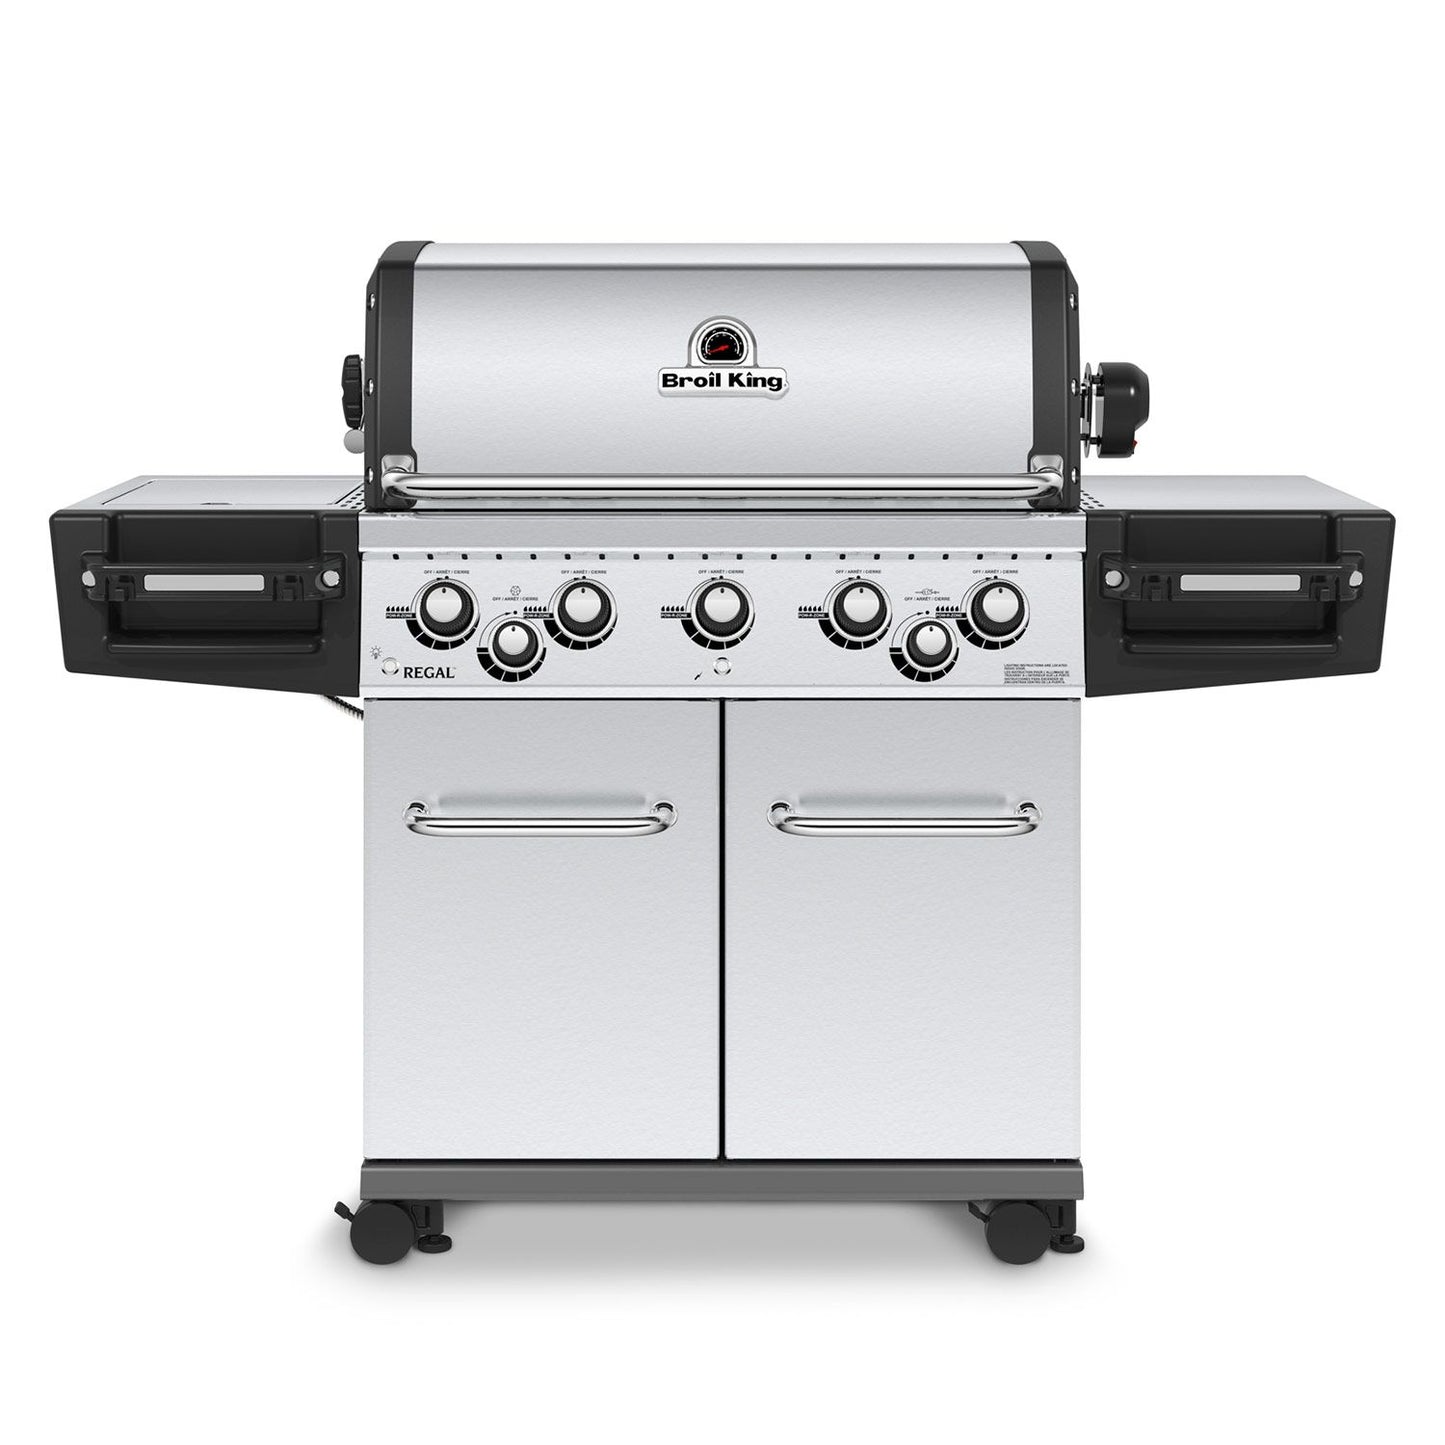 Broil King Regal S 590 Pro Infrared Gas Grill BK95894